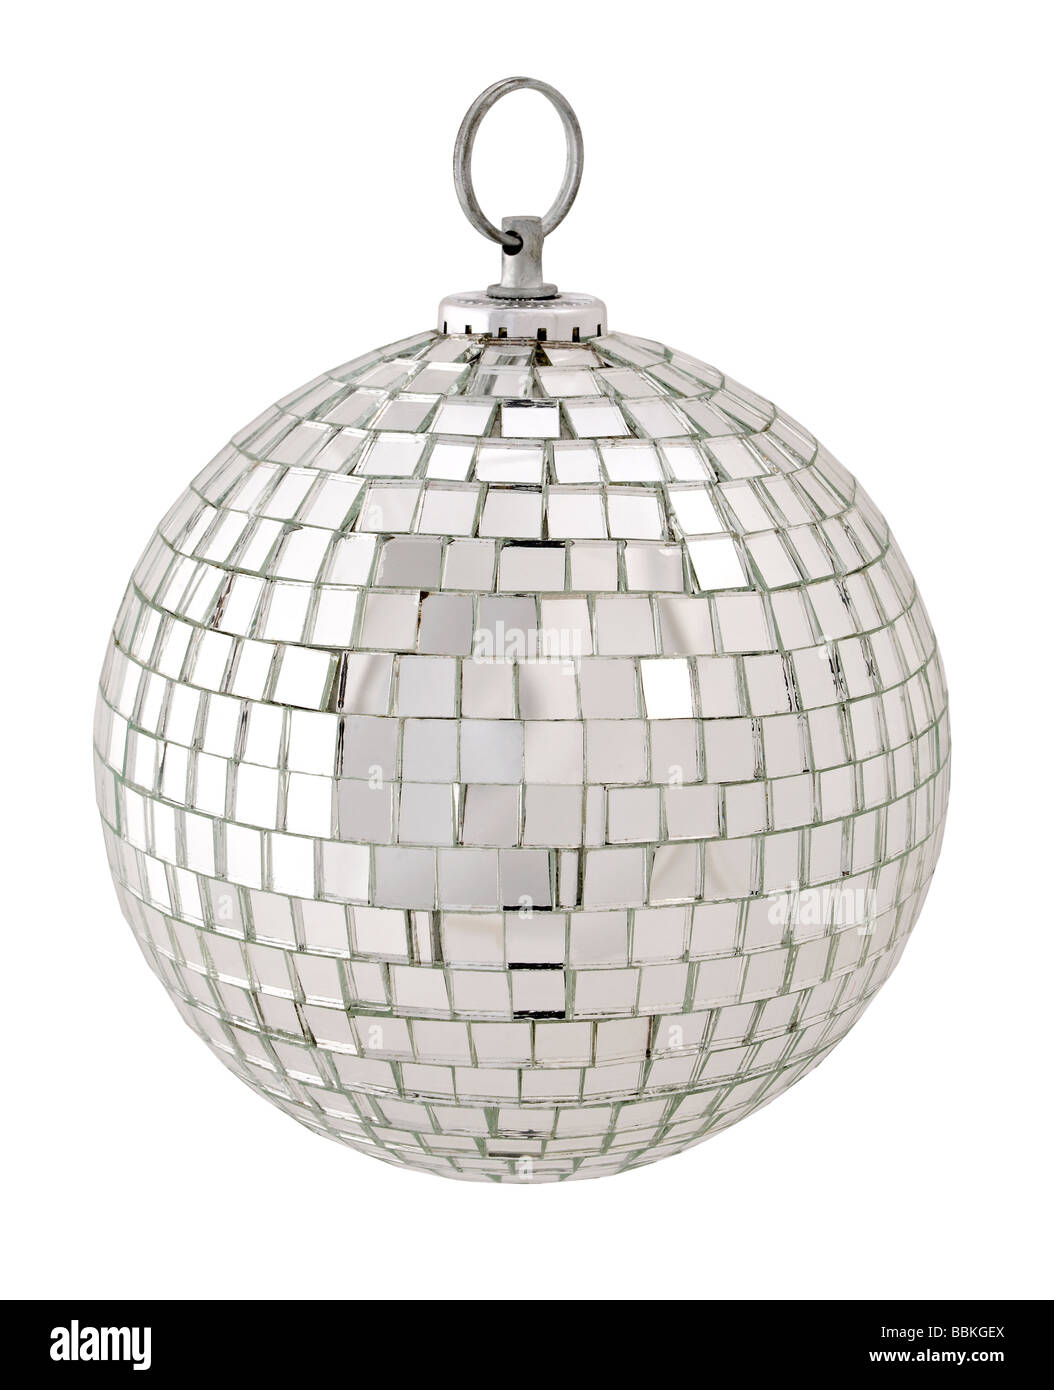 600+ Disco Balls Top View Stock Photos, Pictures & Royalty-Free